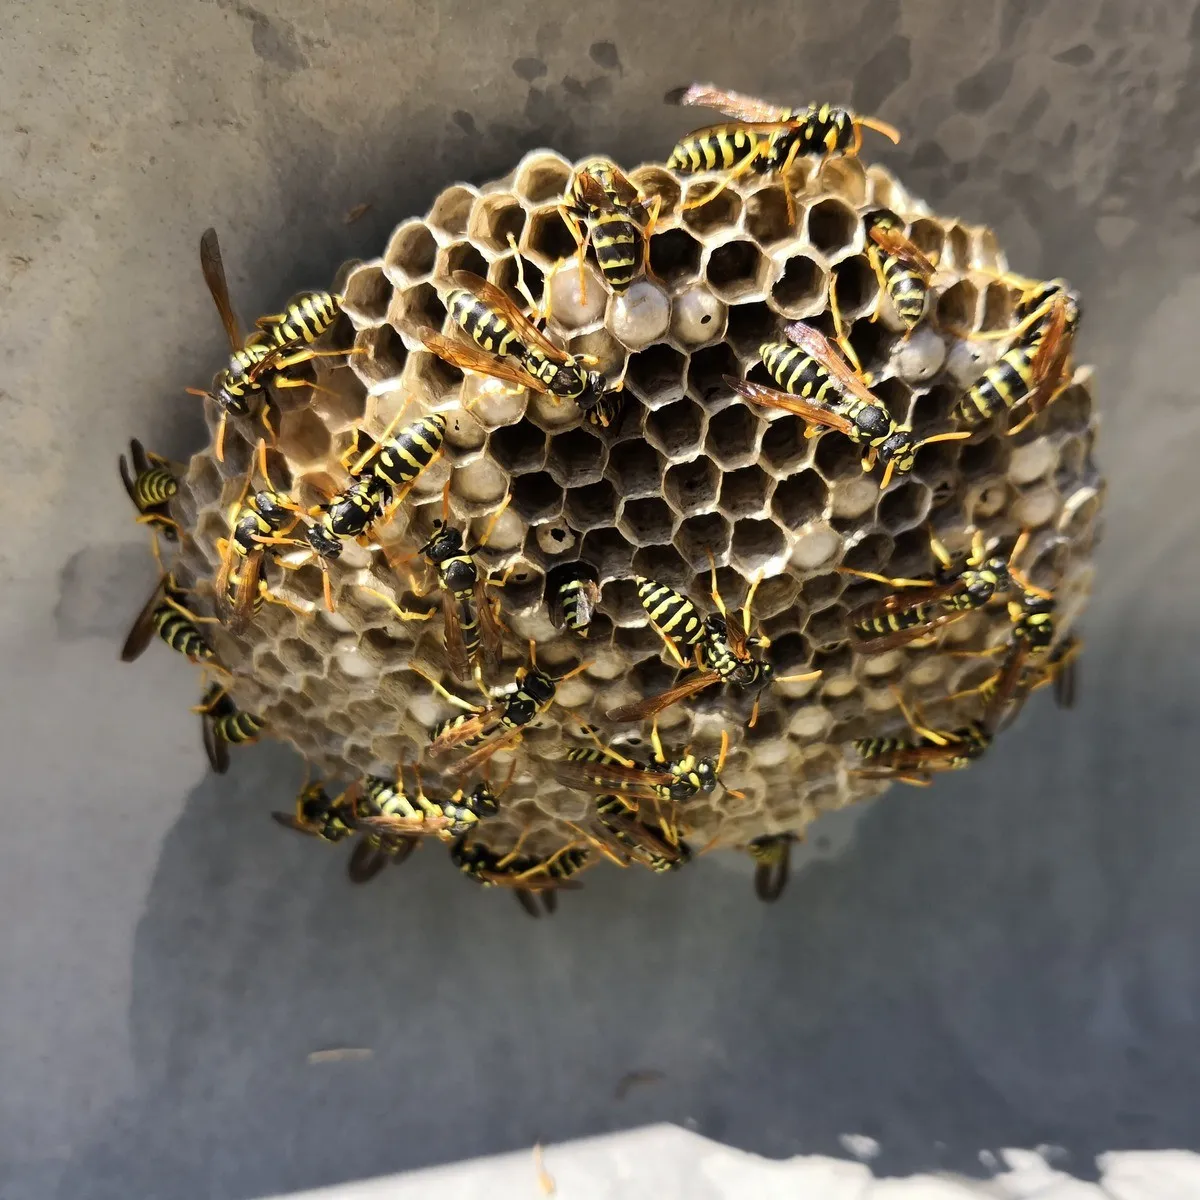 Hire Bees Evictions for Professional Wasp Nest Removal Near Lafayette, CA!